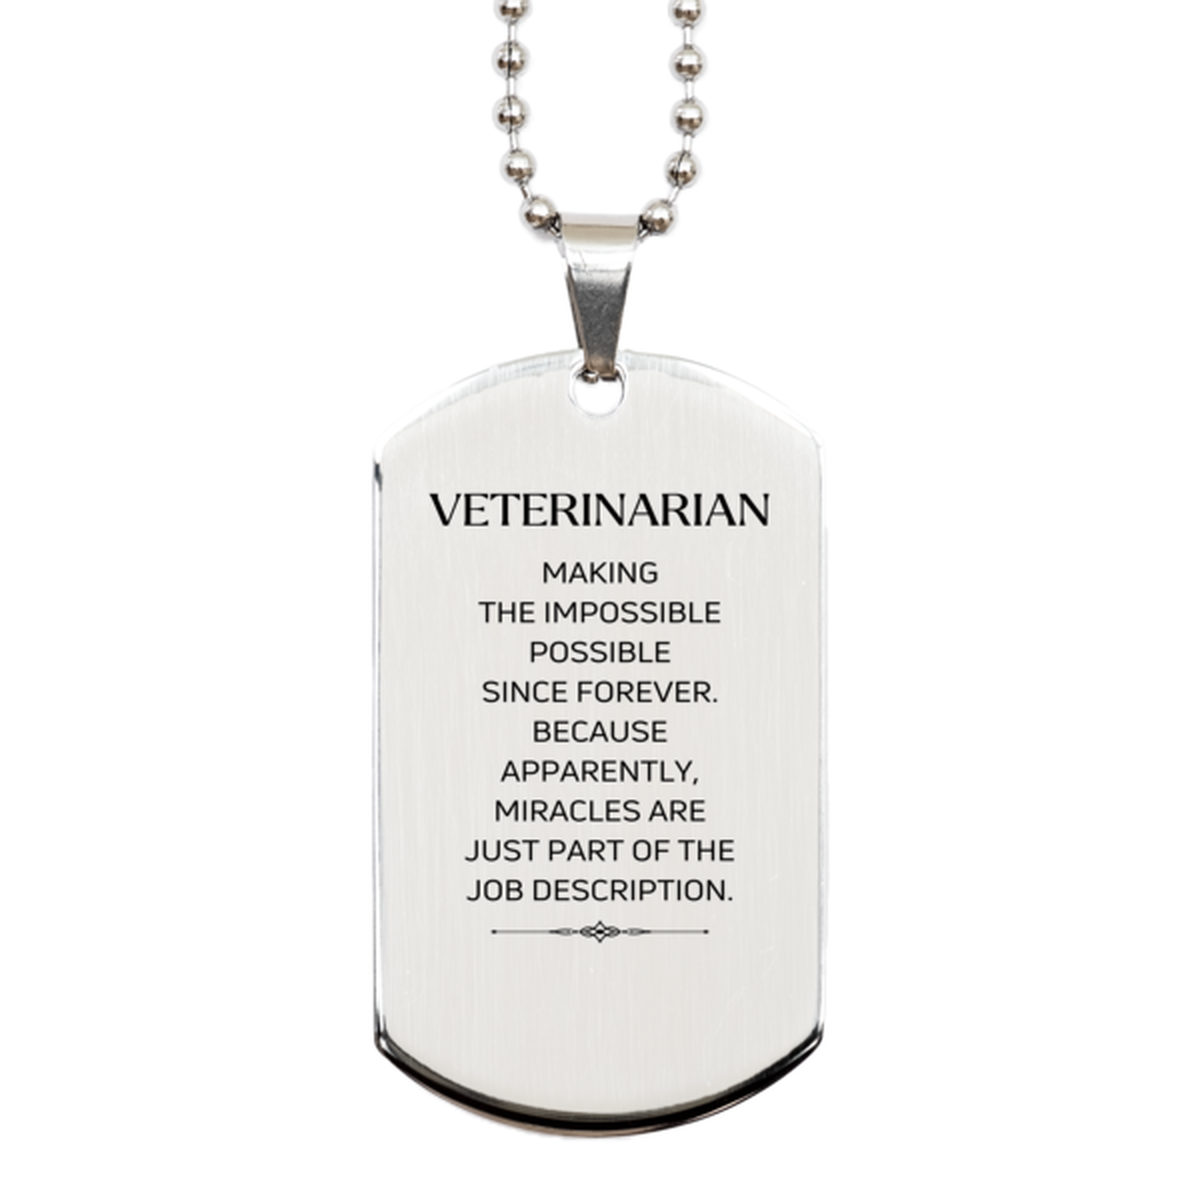 Funny Veterinarian Gifts, Miracles are just part of the job description, Inspirational Birthday Silver Dog Tag For Veterinarian, Men, Women, Coworkers, Friends, Boss